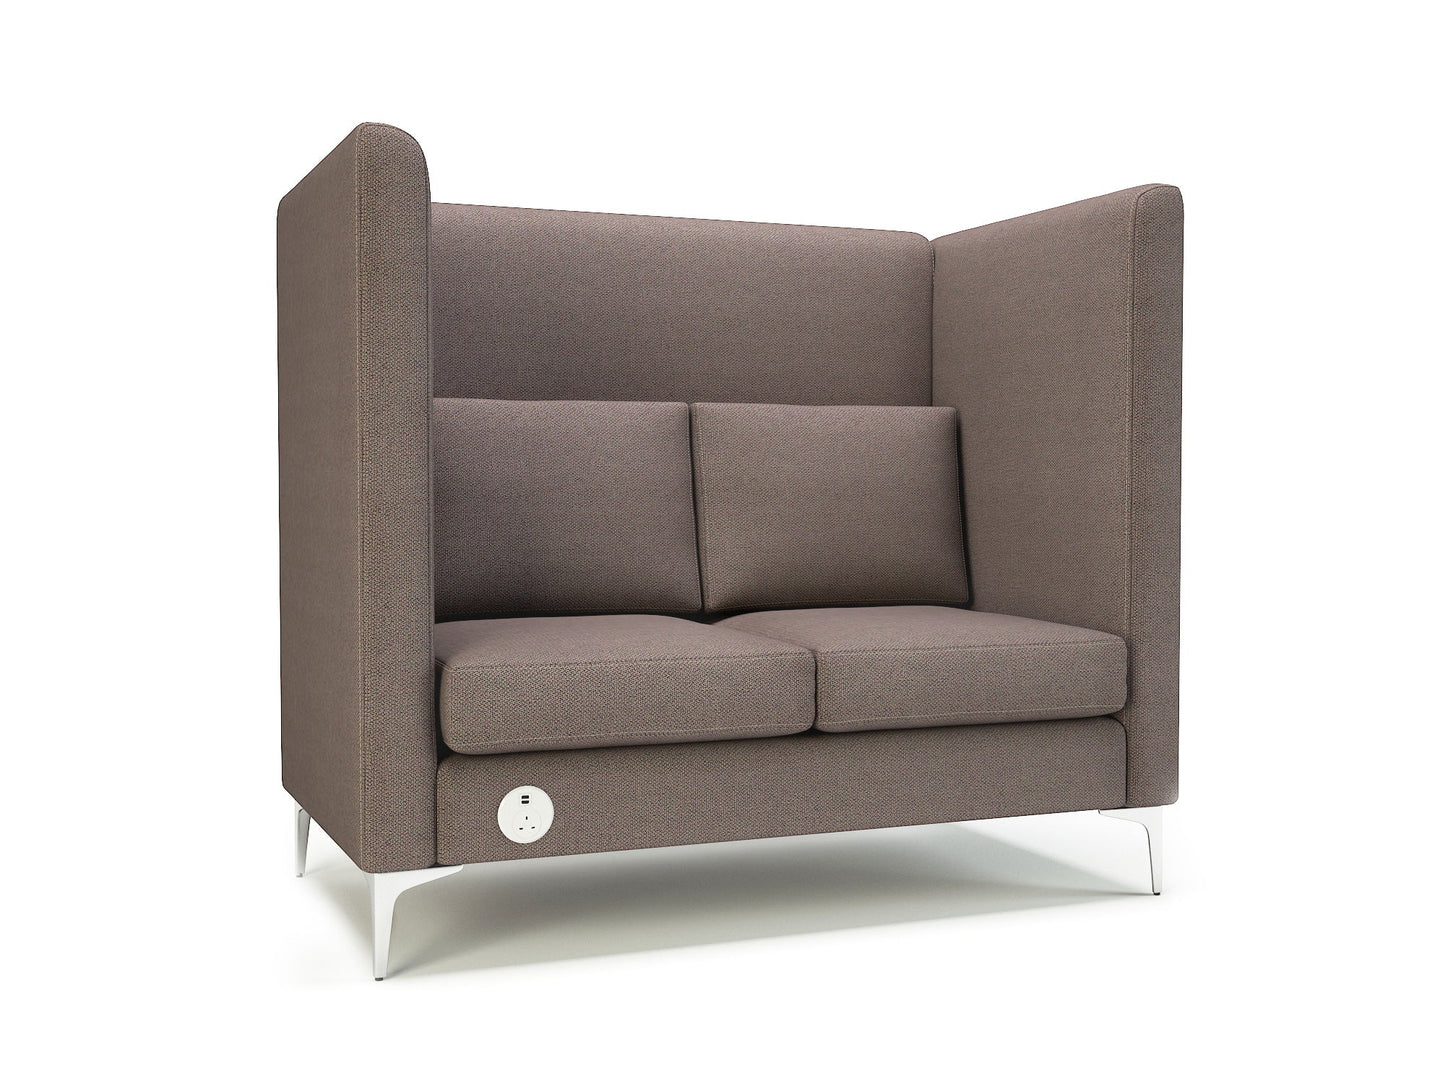 Altus 128cm Wide Privacy Booth in Camira Era Fabric with Socket